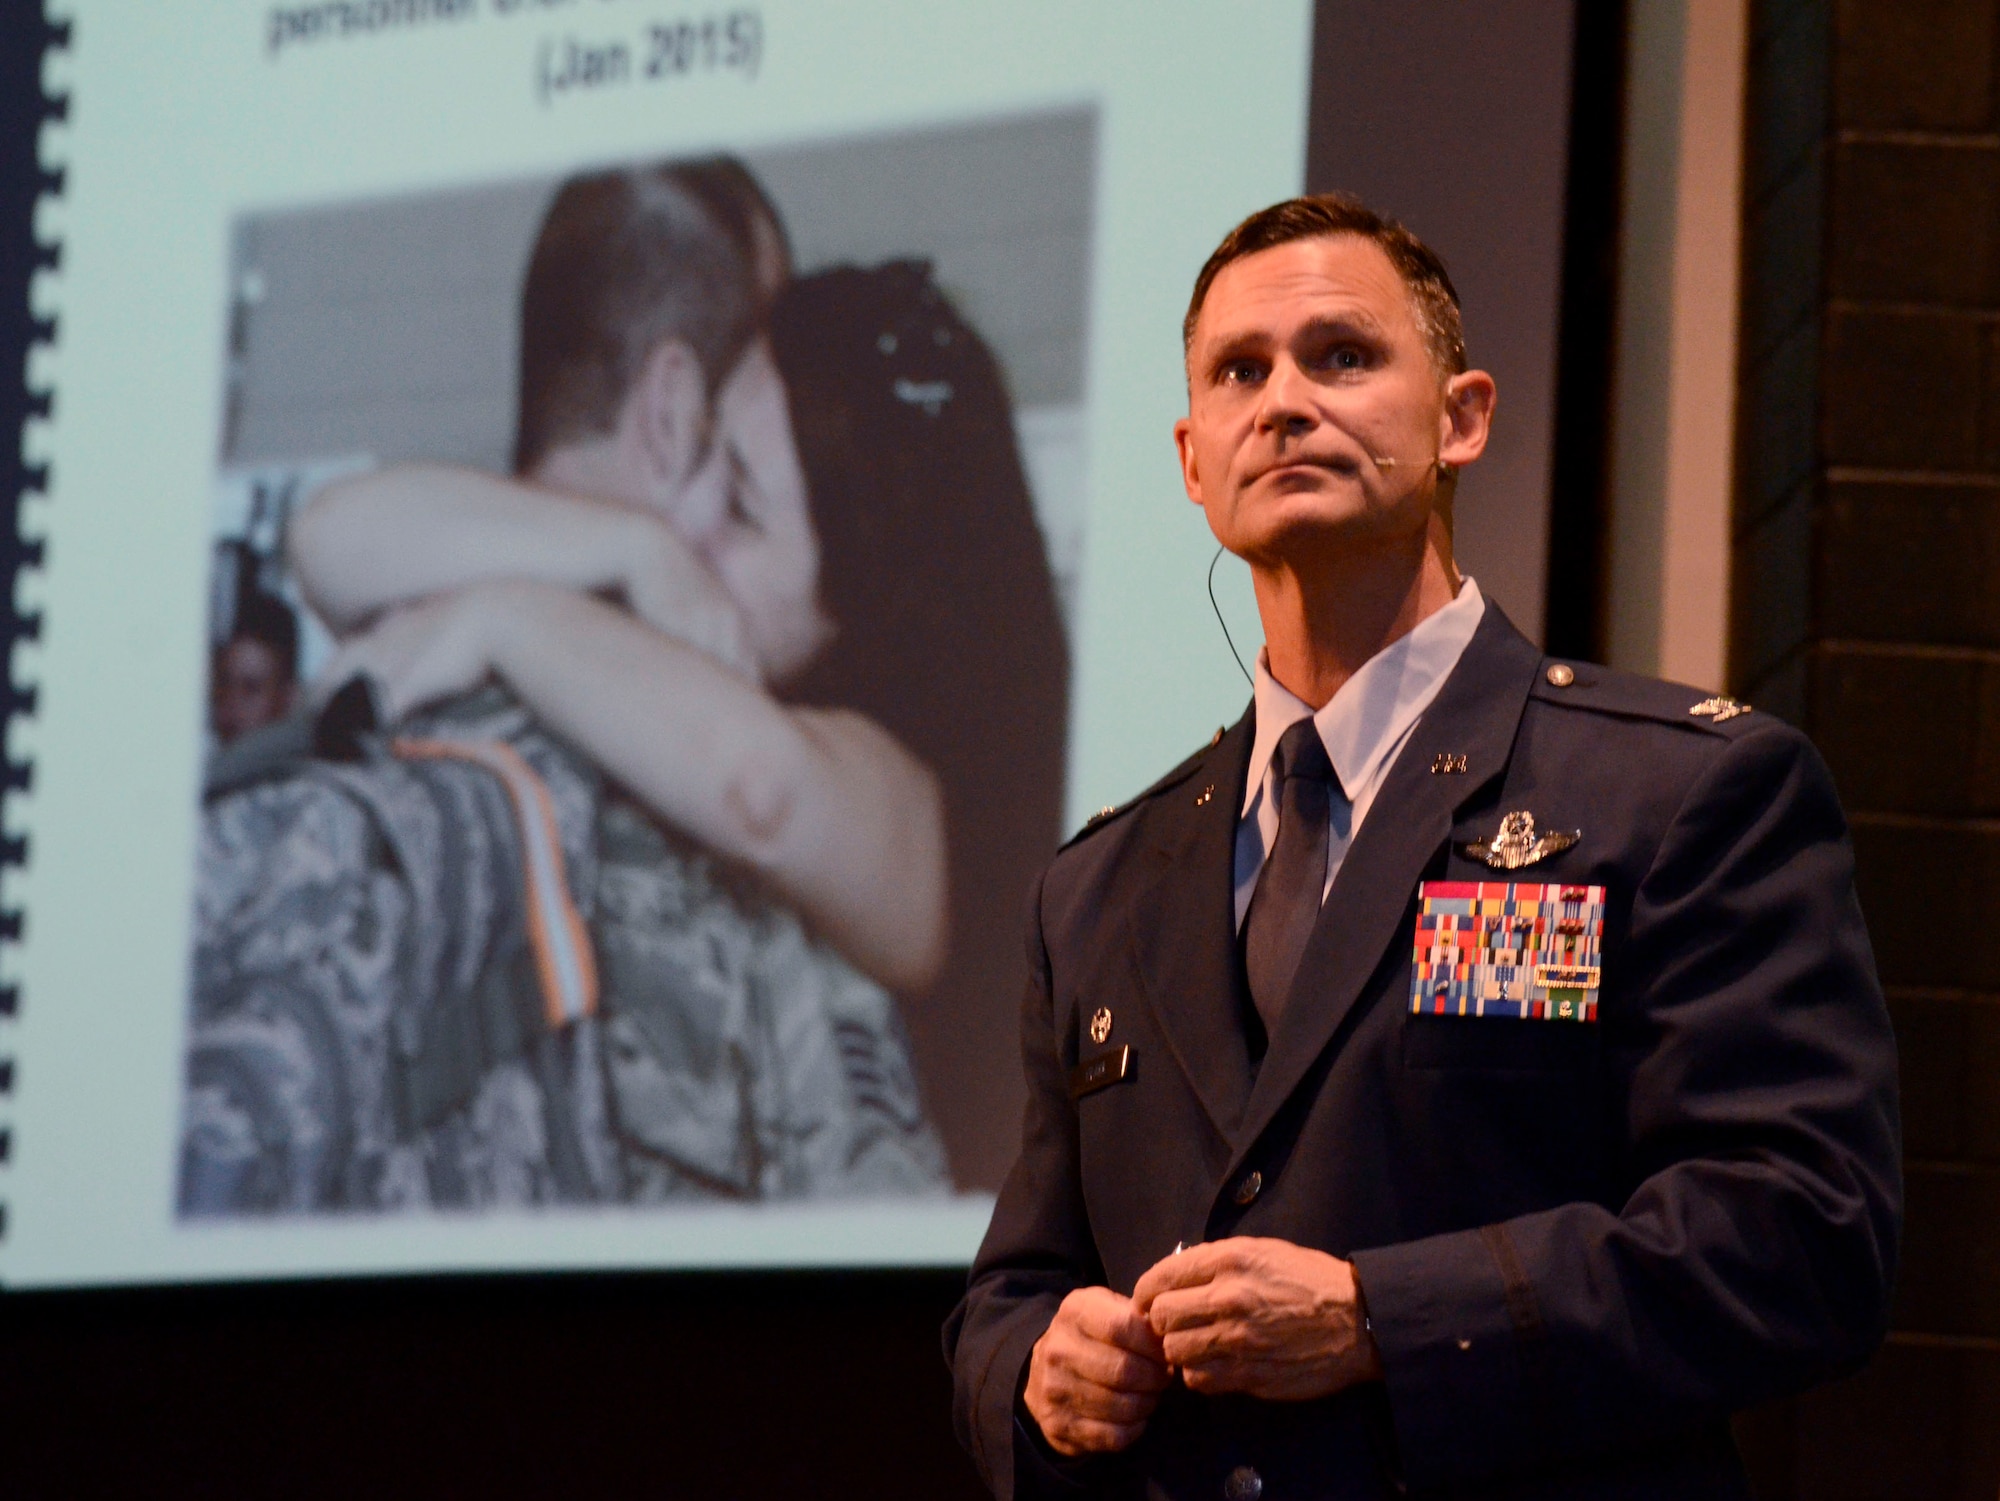 Col. Brett Clark, 94th Airlift Wing commander, speaks to a crowd of business professionals about Dobbins Air Reserve Base mission at the Acworth Business Associations monthly meeting held in Acworth, Ga. Nov. 6, 2014. (U.S. Air Force photo by Don Peek/Released)